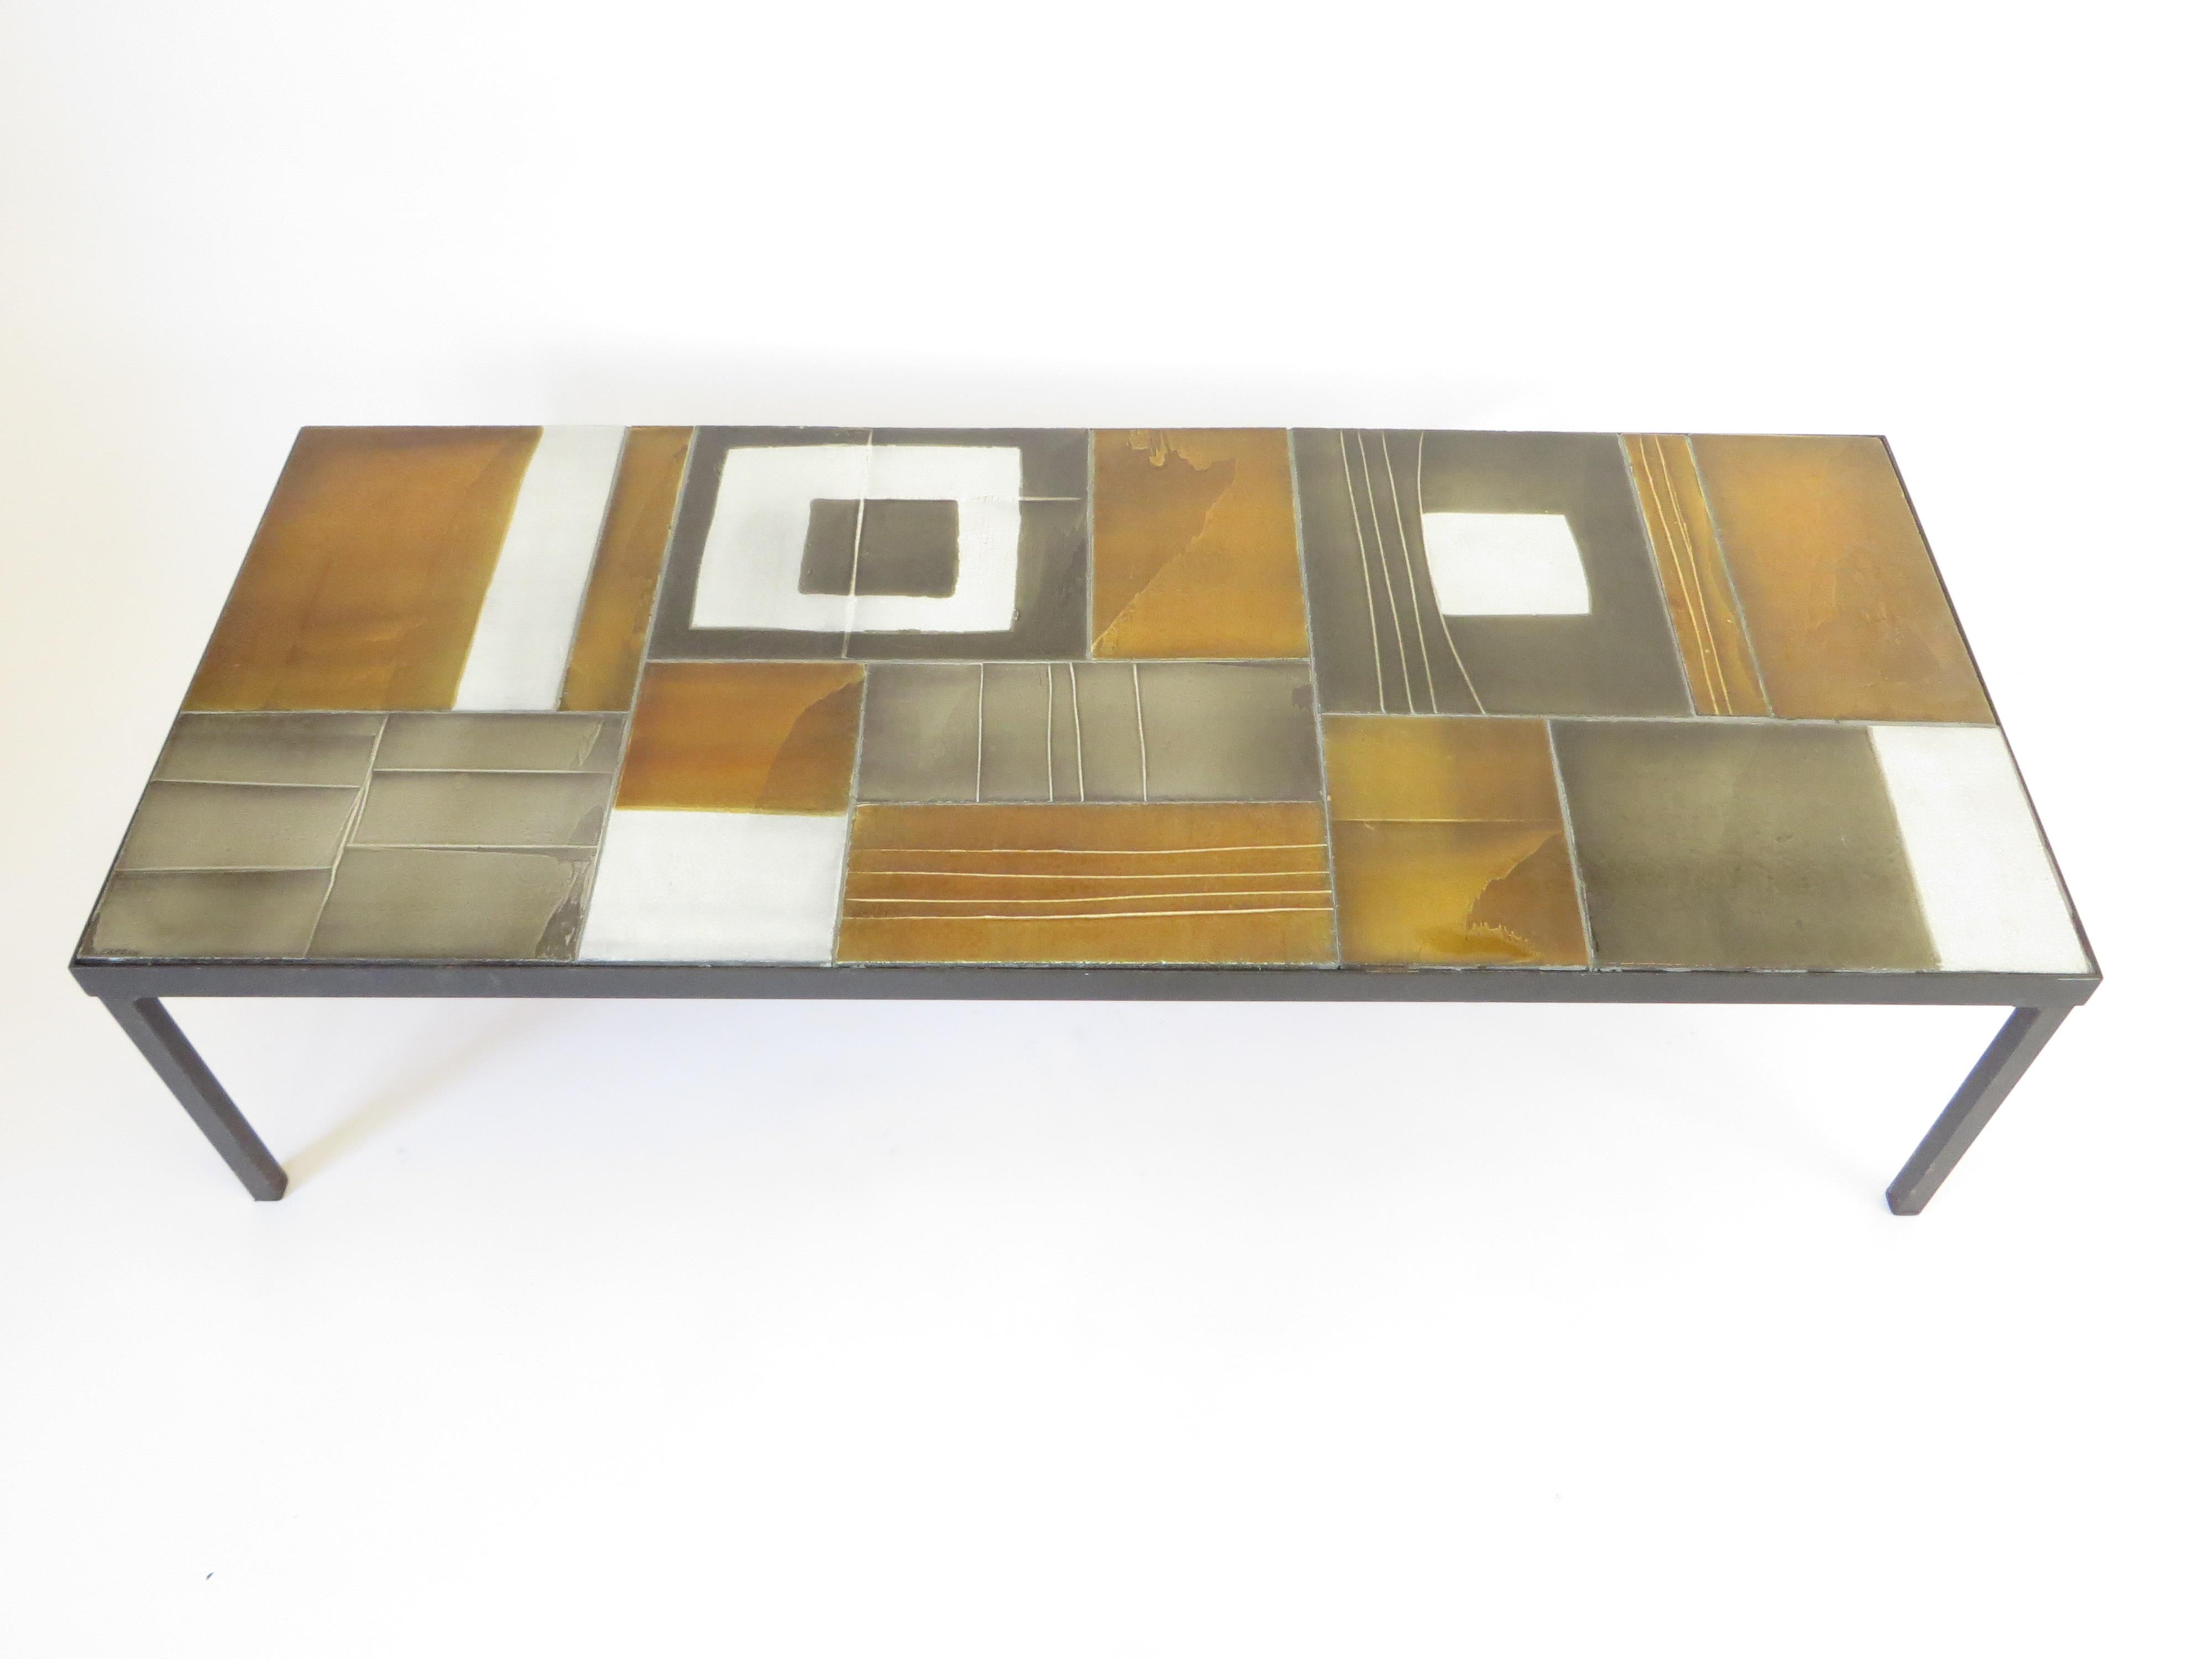 Roger Capron French ceramic artist from Vallauris signed multi color coffee table of glazed lave tiles set in a black iron frame.
Colors of amber, ochre, gray, and white compose the tiles of this table and signed in the corner.
Measures: 47.5